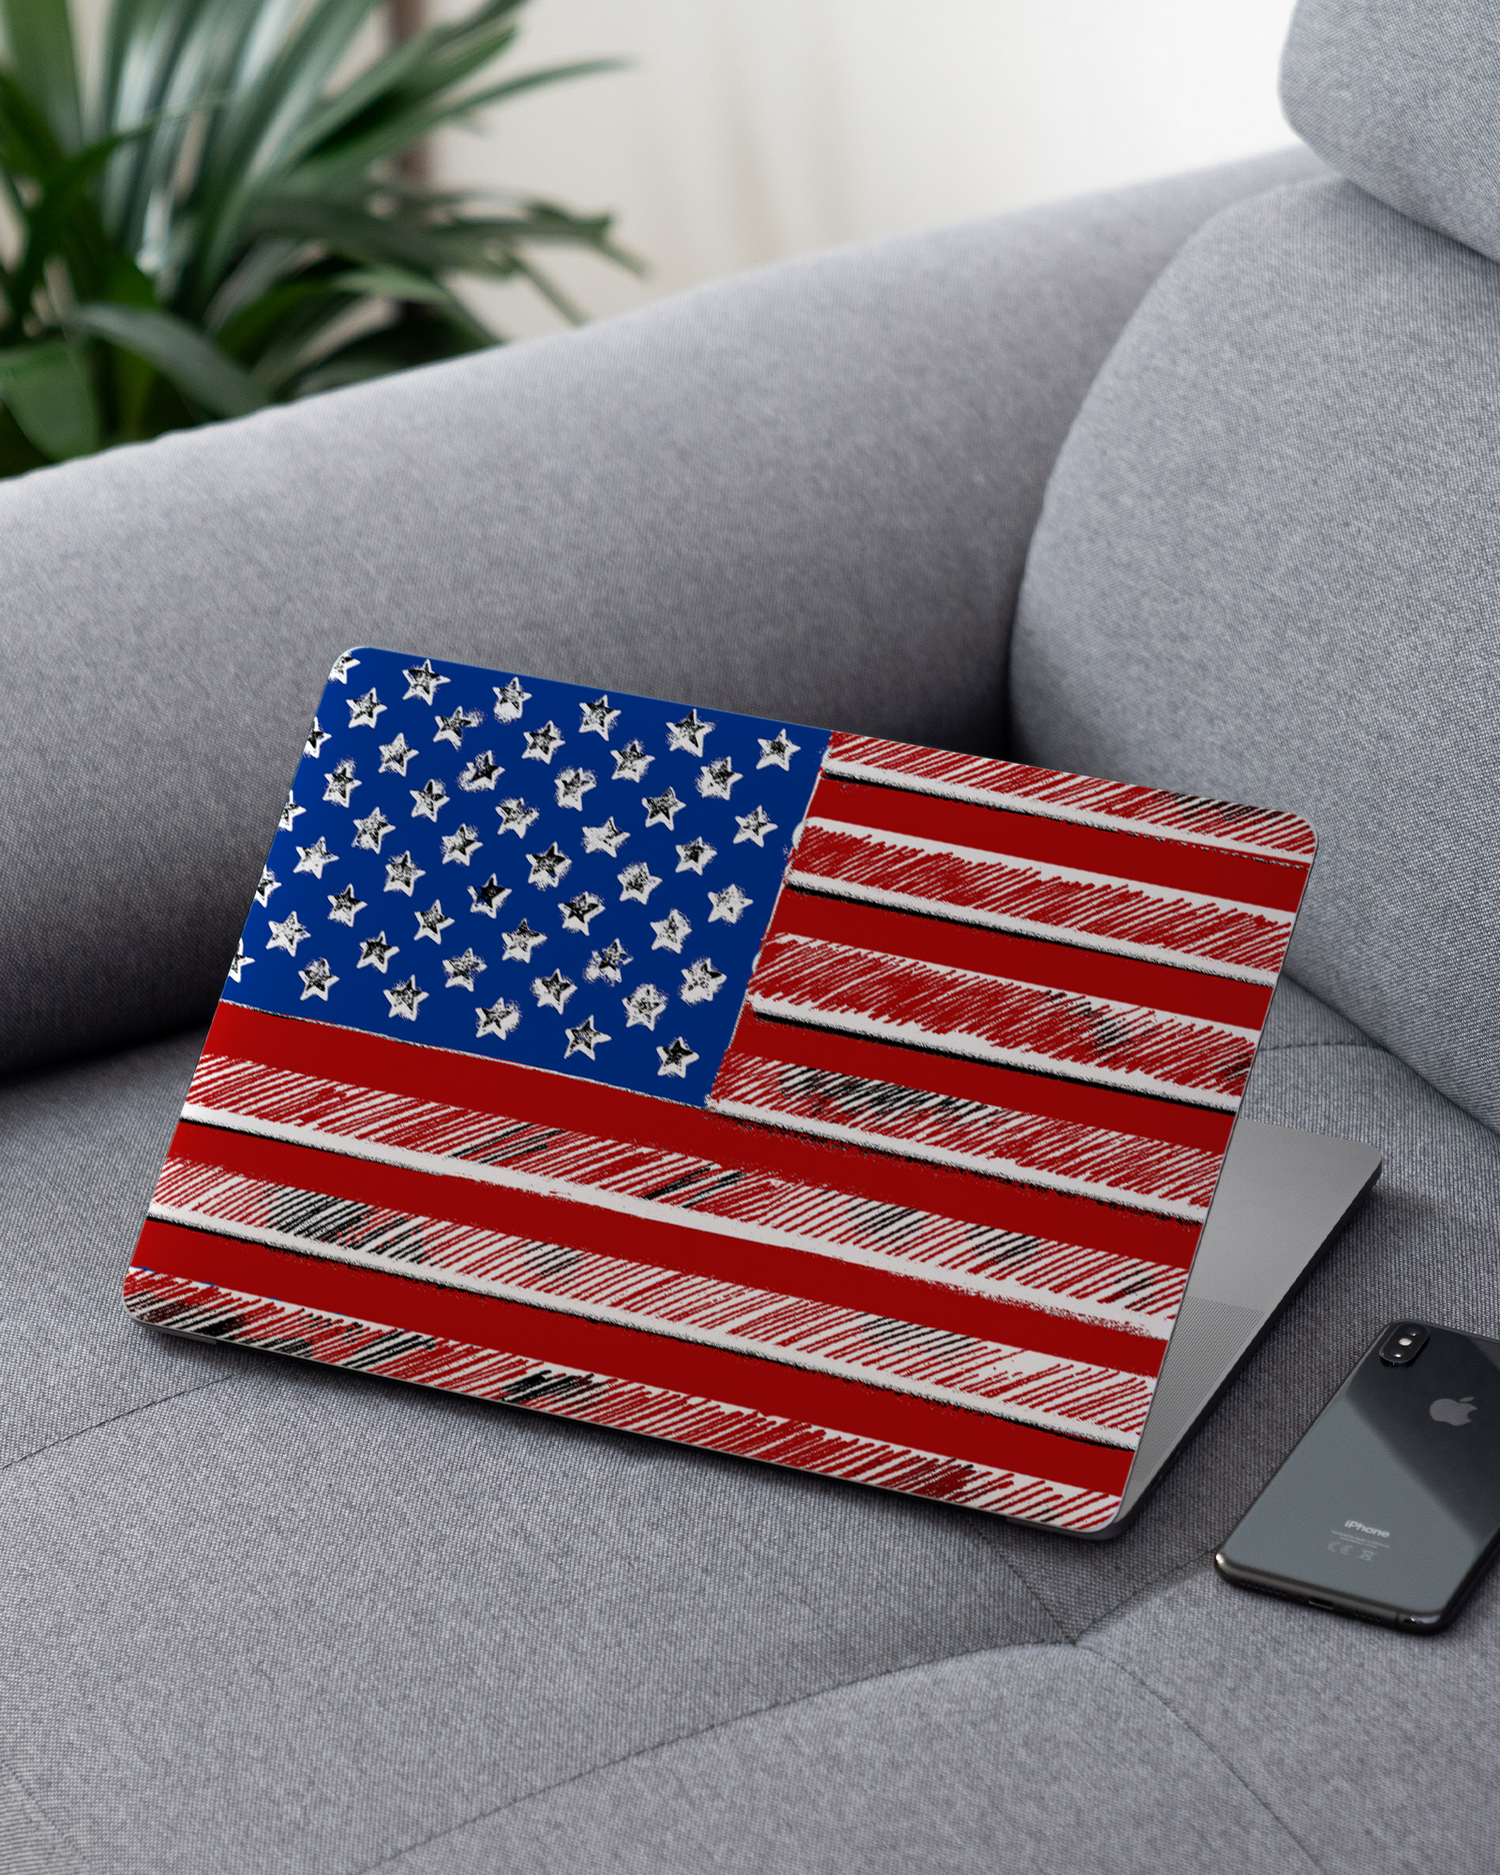 American Flag Color Laptop Skin for 13 inch Apple MacBooks on a couch